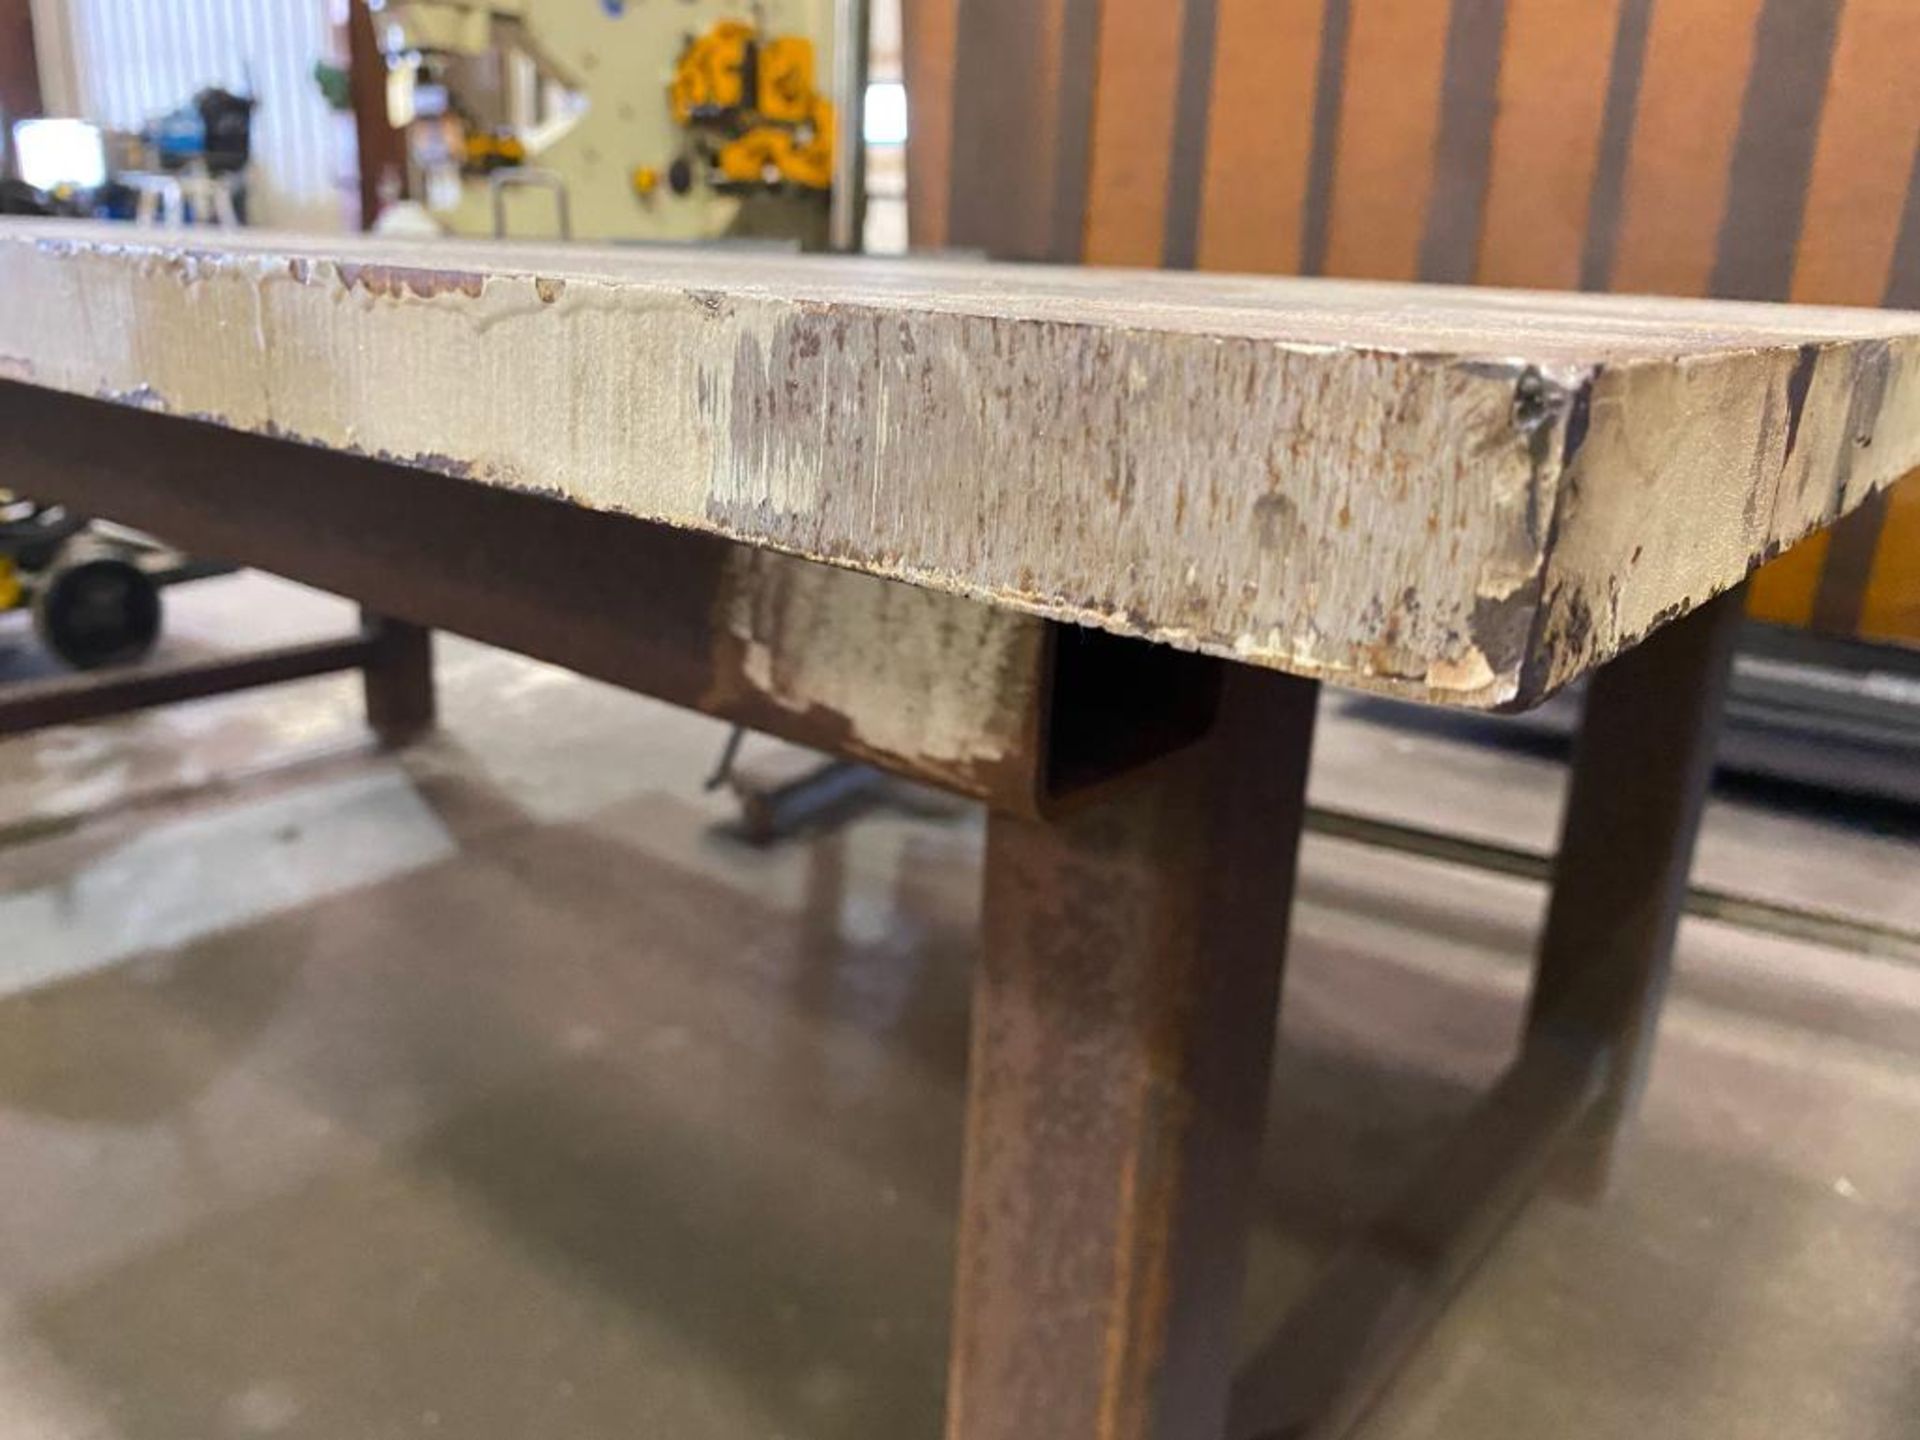 Welding Table, 84" x 54" x 28", 1-1/4" Thick Top - Image 3 of 3